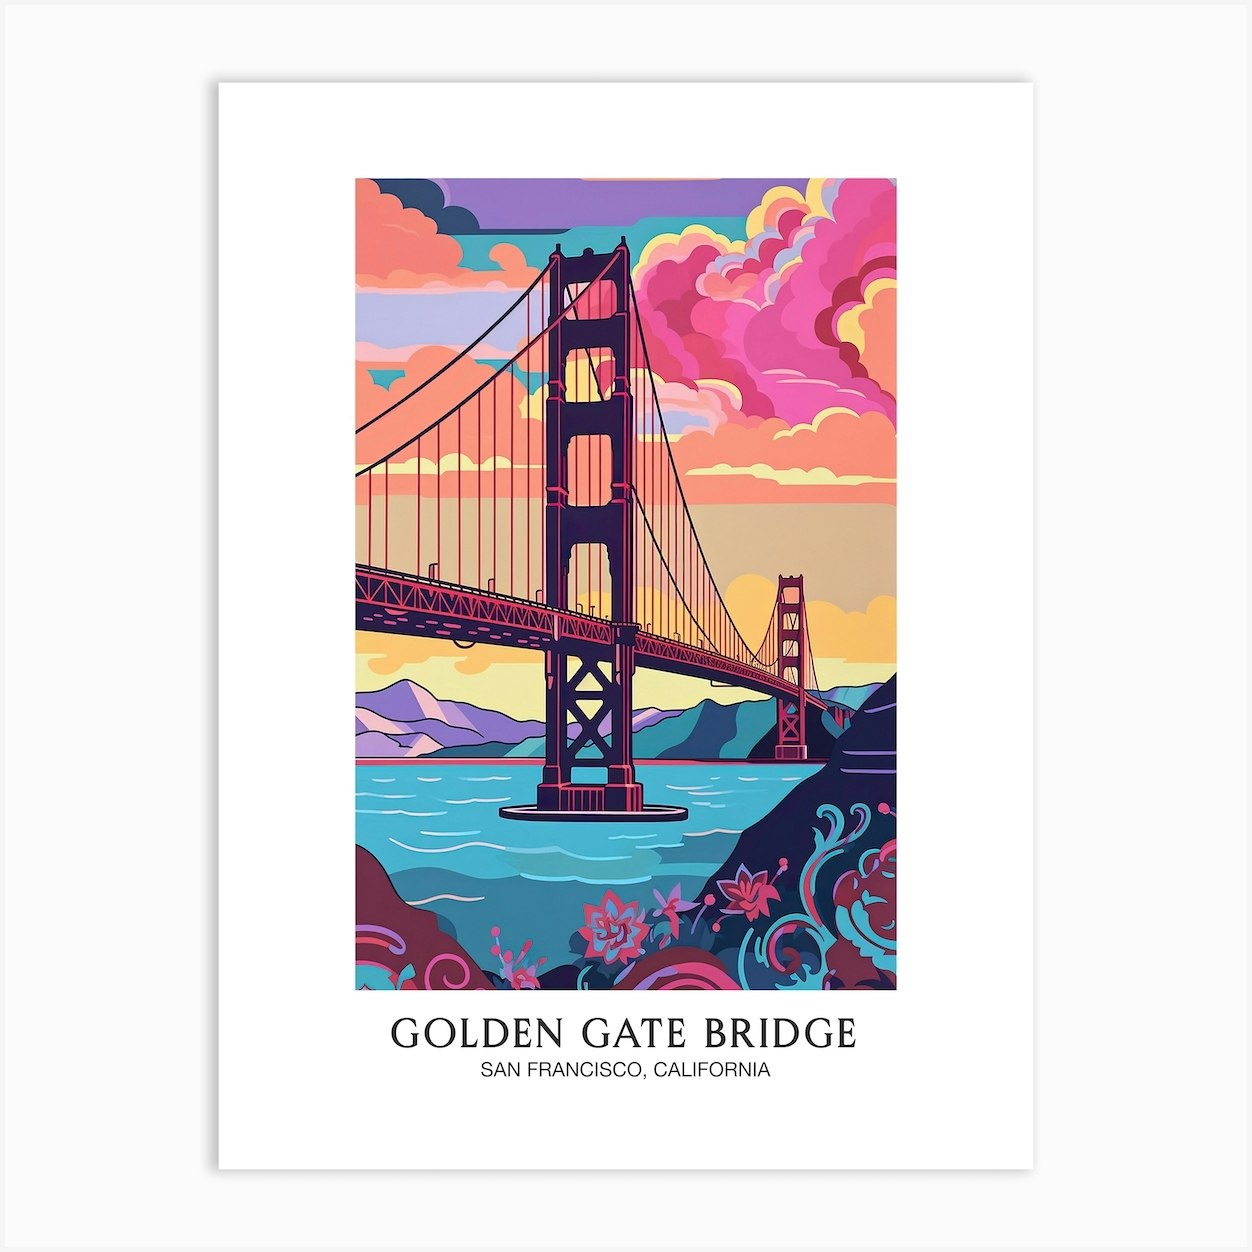 Golden Gate Bridge San Francisco Colourful 8 Travel Poster Art Print by  Travel Poster Collection - Fy